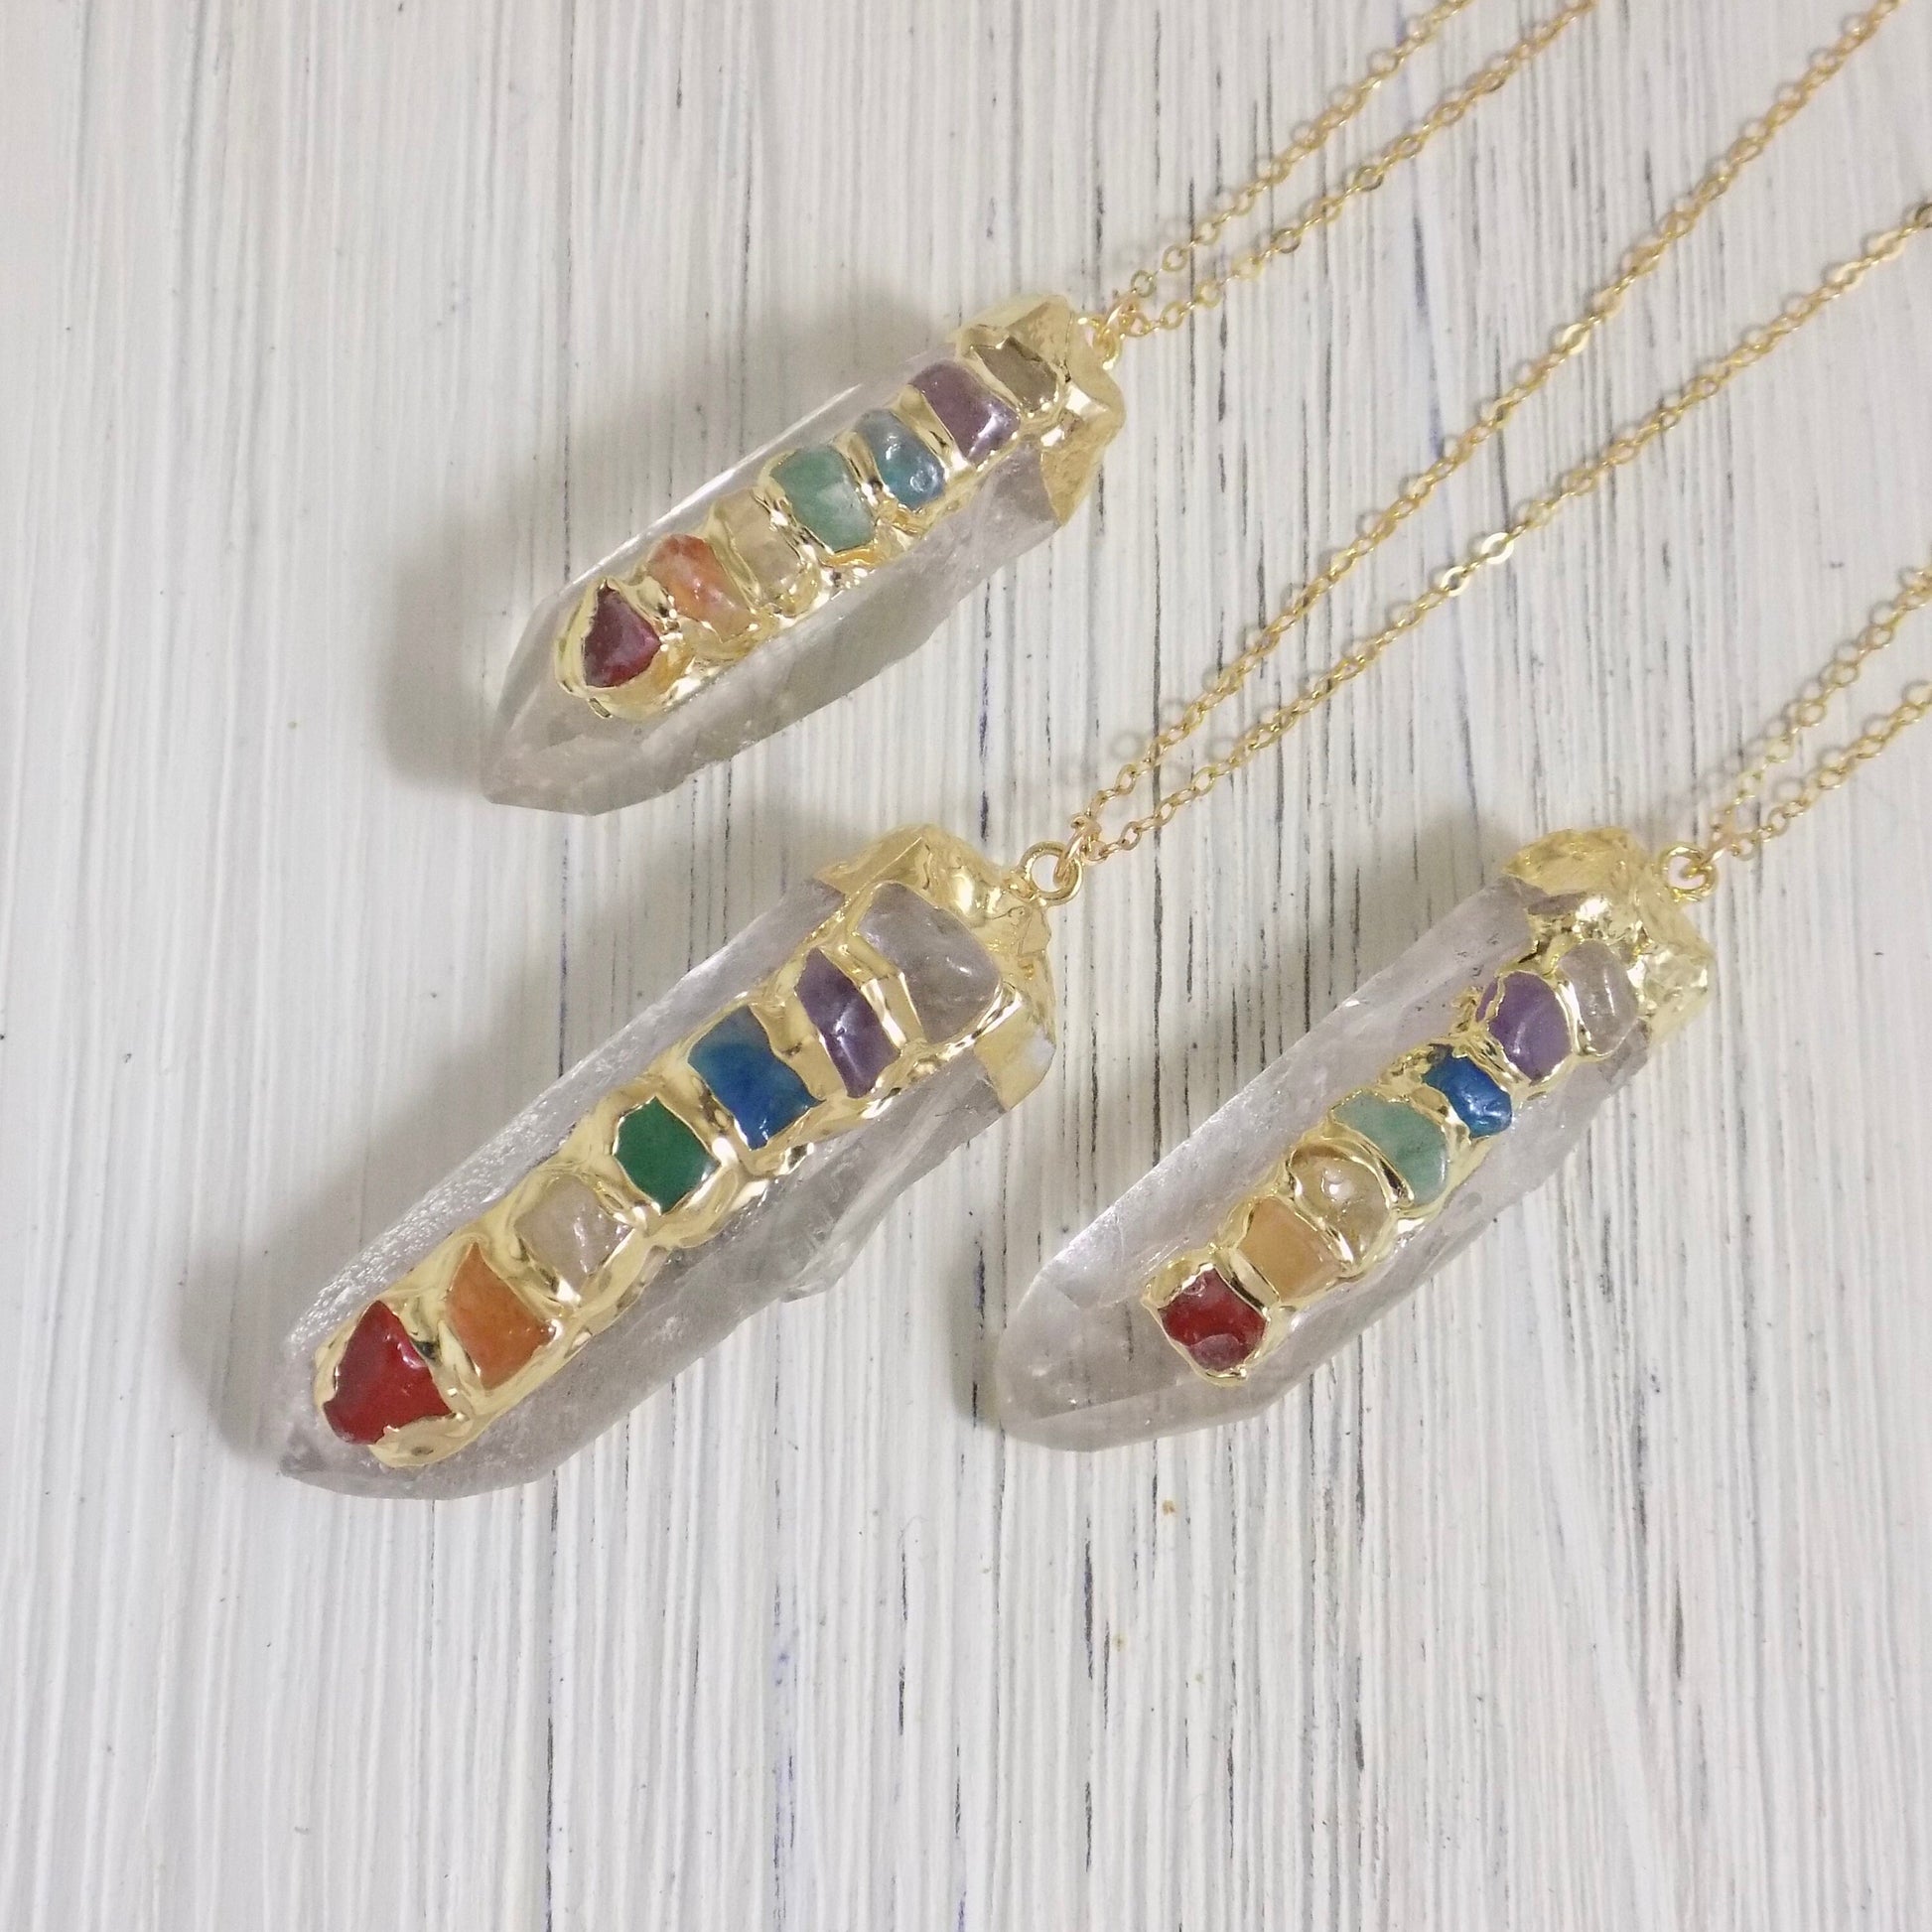 Gift Women - 7 Chakra Necklace - Clear Crystal Necklace Gold - Yoga Necklace - Boho Necklace Long - Christmas Gift - G12-66